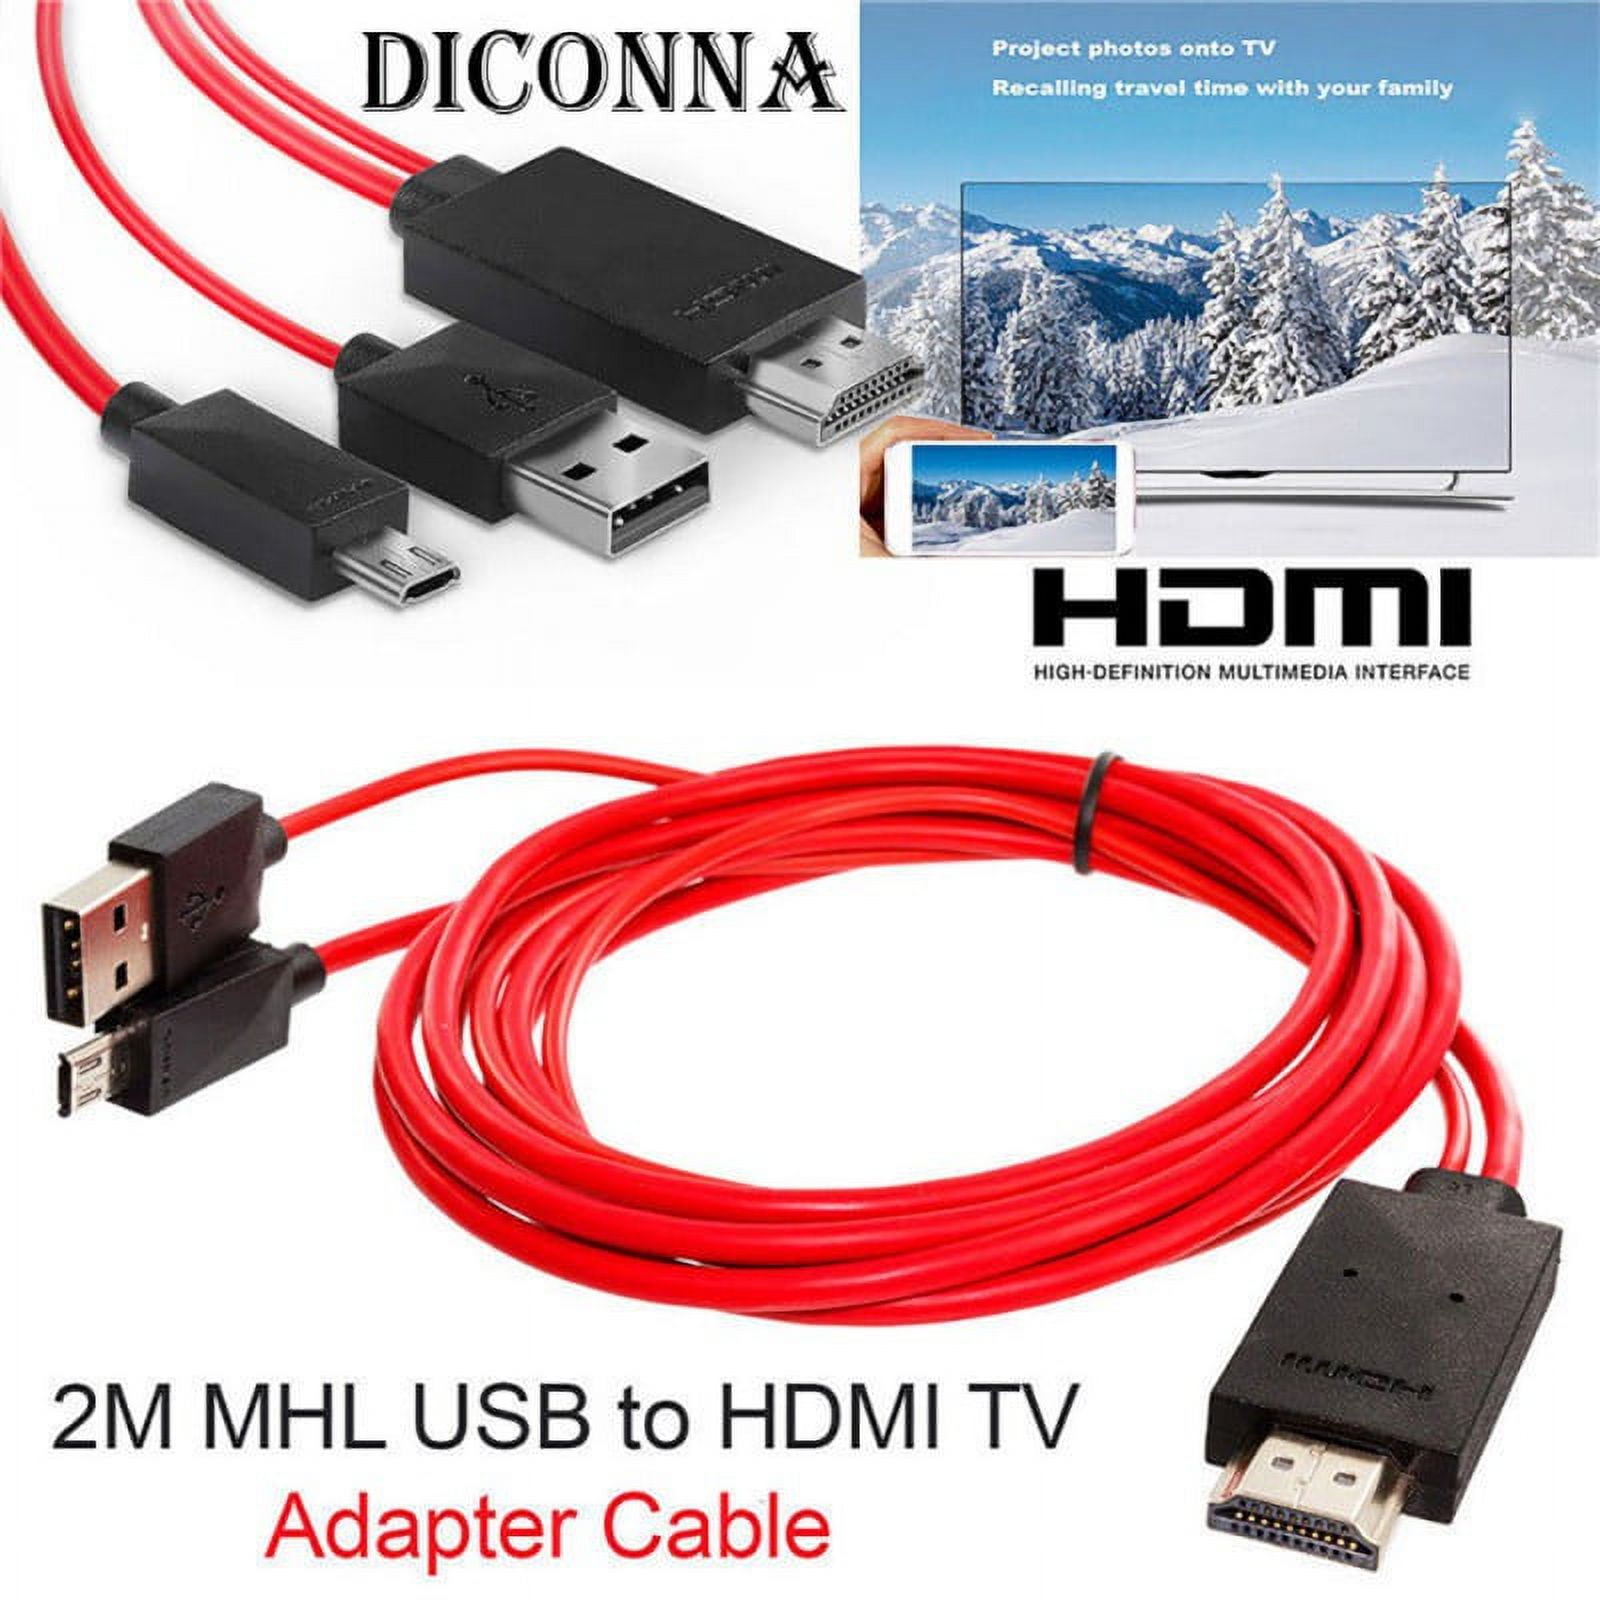  Micro USB to HDMI Adapter Android Phone to HD TV